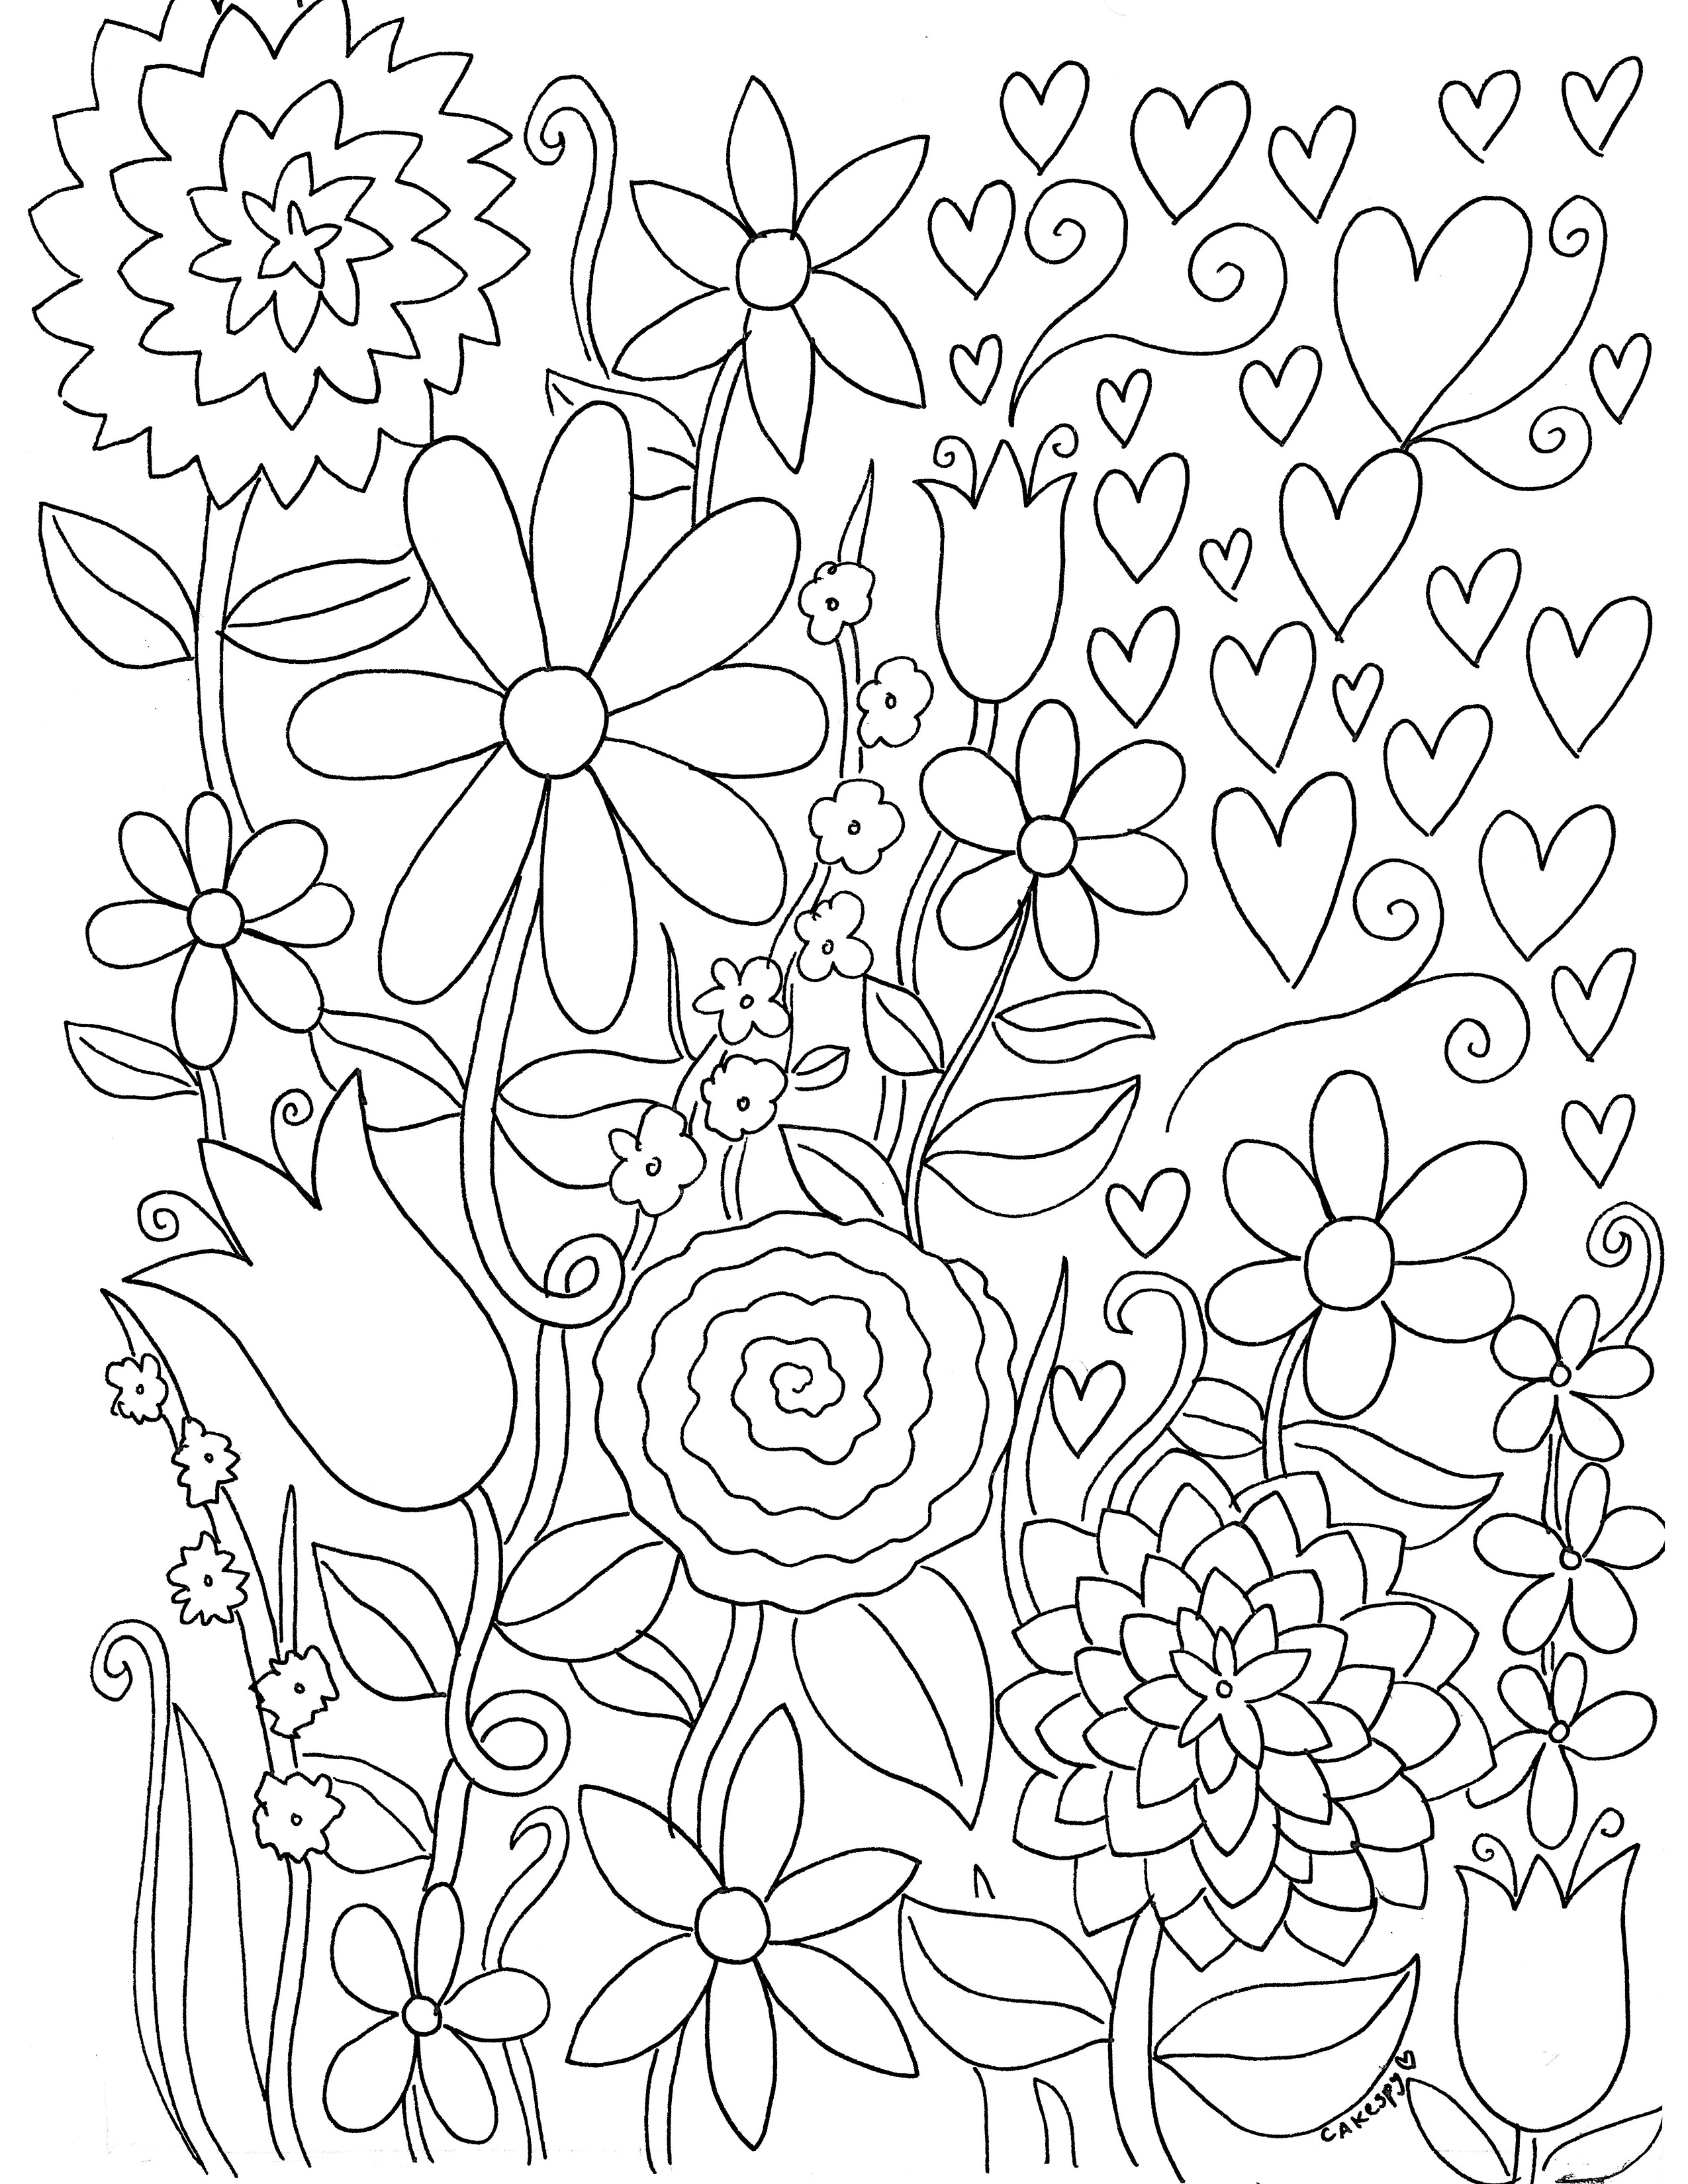 Create Your Own Sunshine Coloring Page Make Your Own Coloring Pages